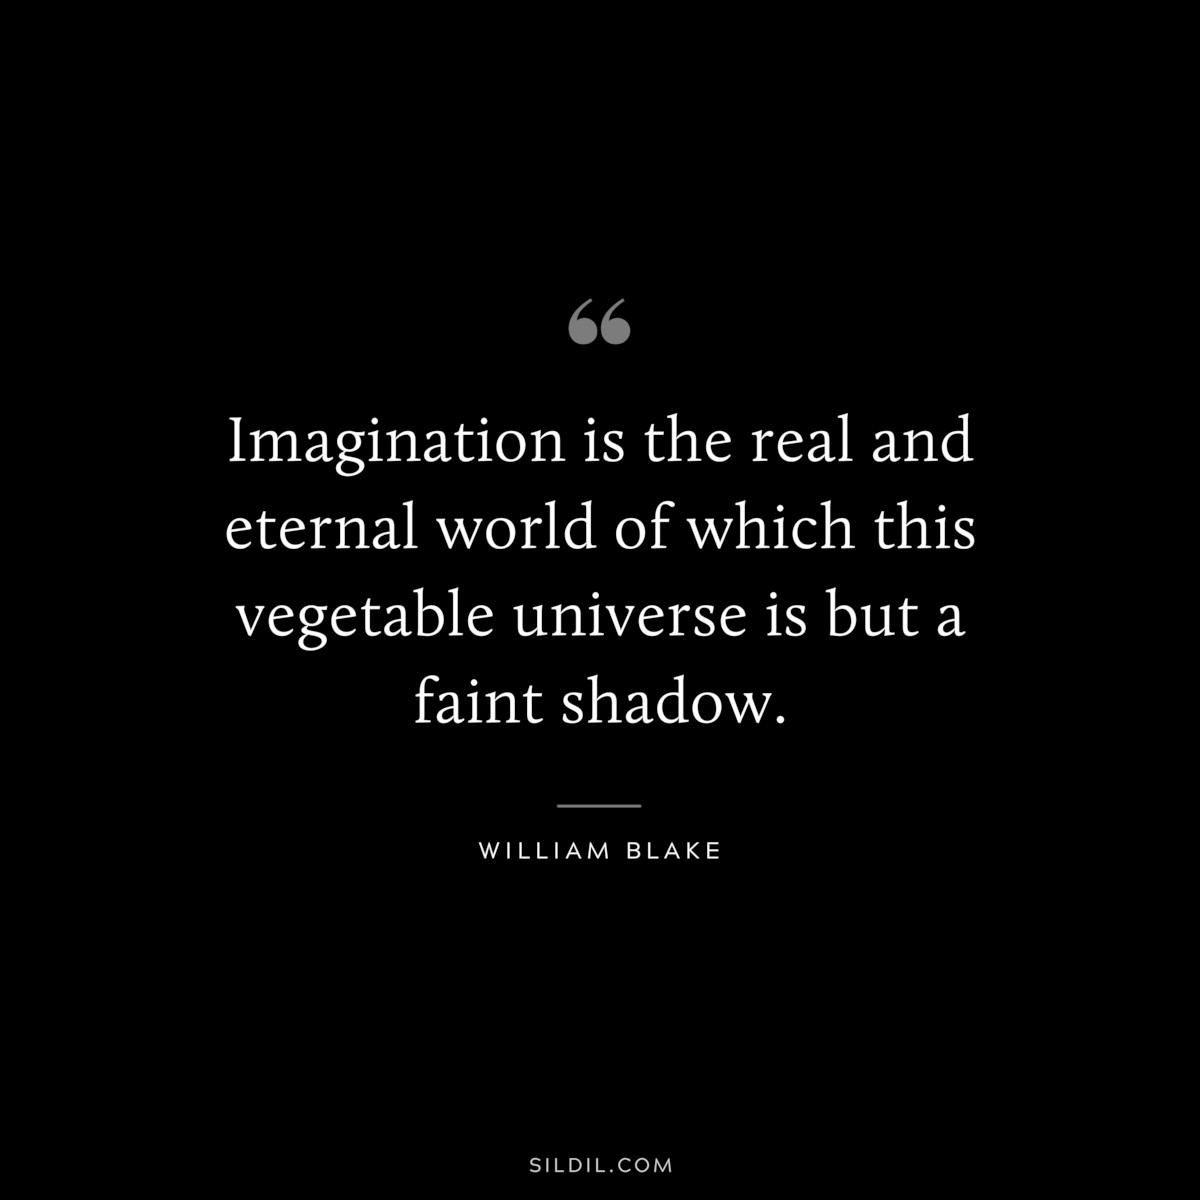 Imagination is the real and eternal world of which this vegetable universe is but a faint shadow. ― William Blake